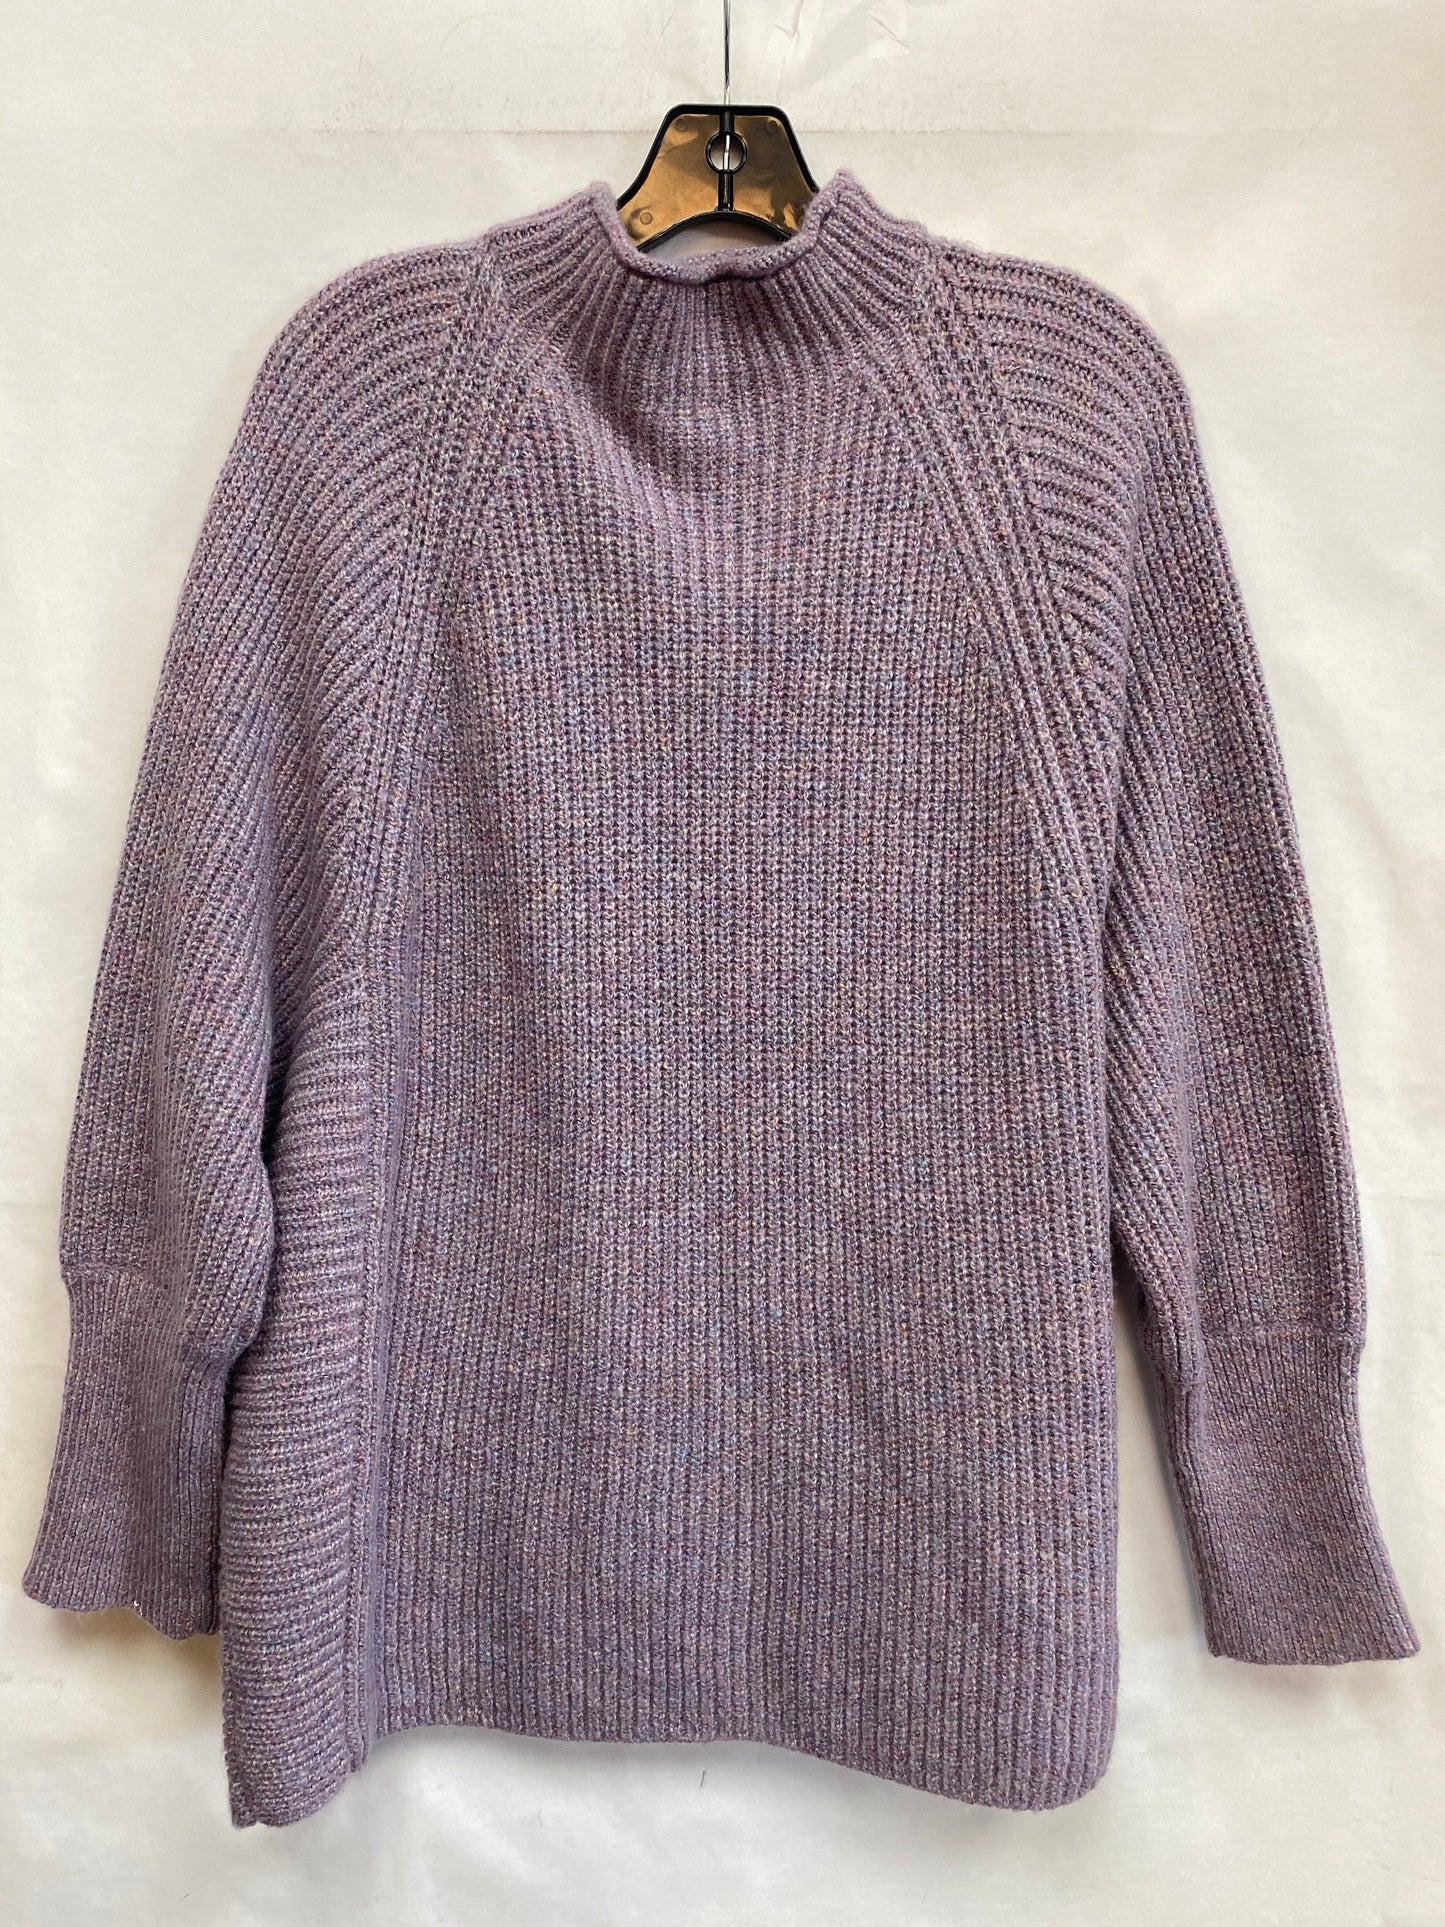 Sweater By Chicos  Size: 3x